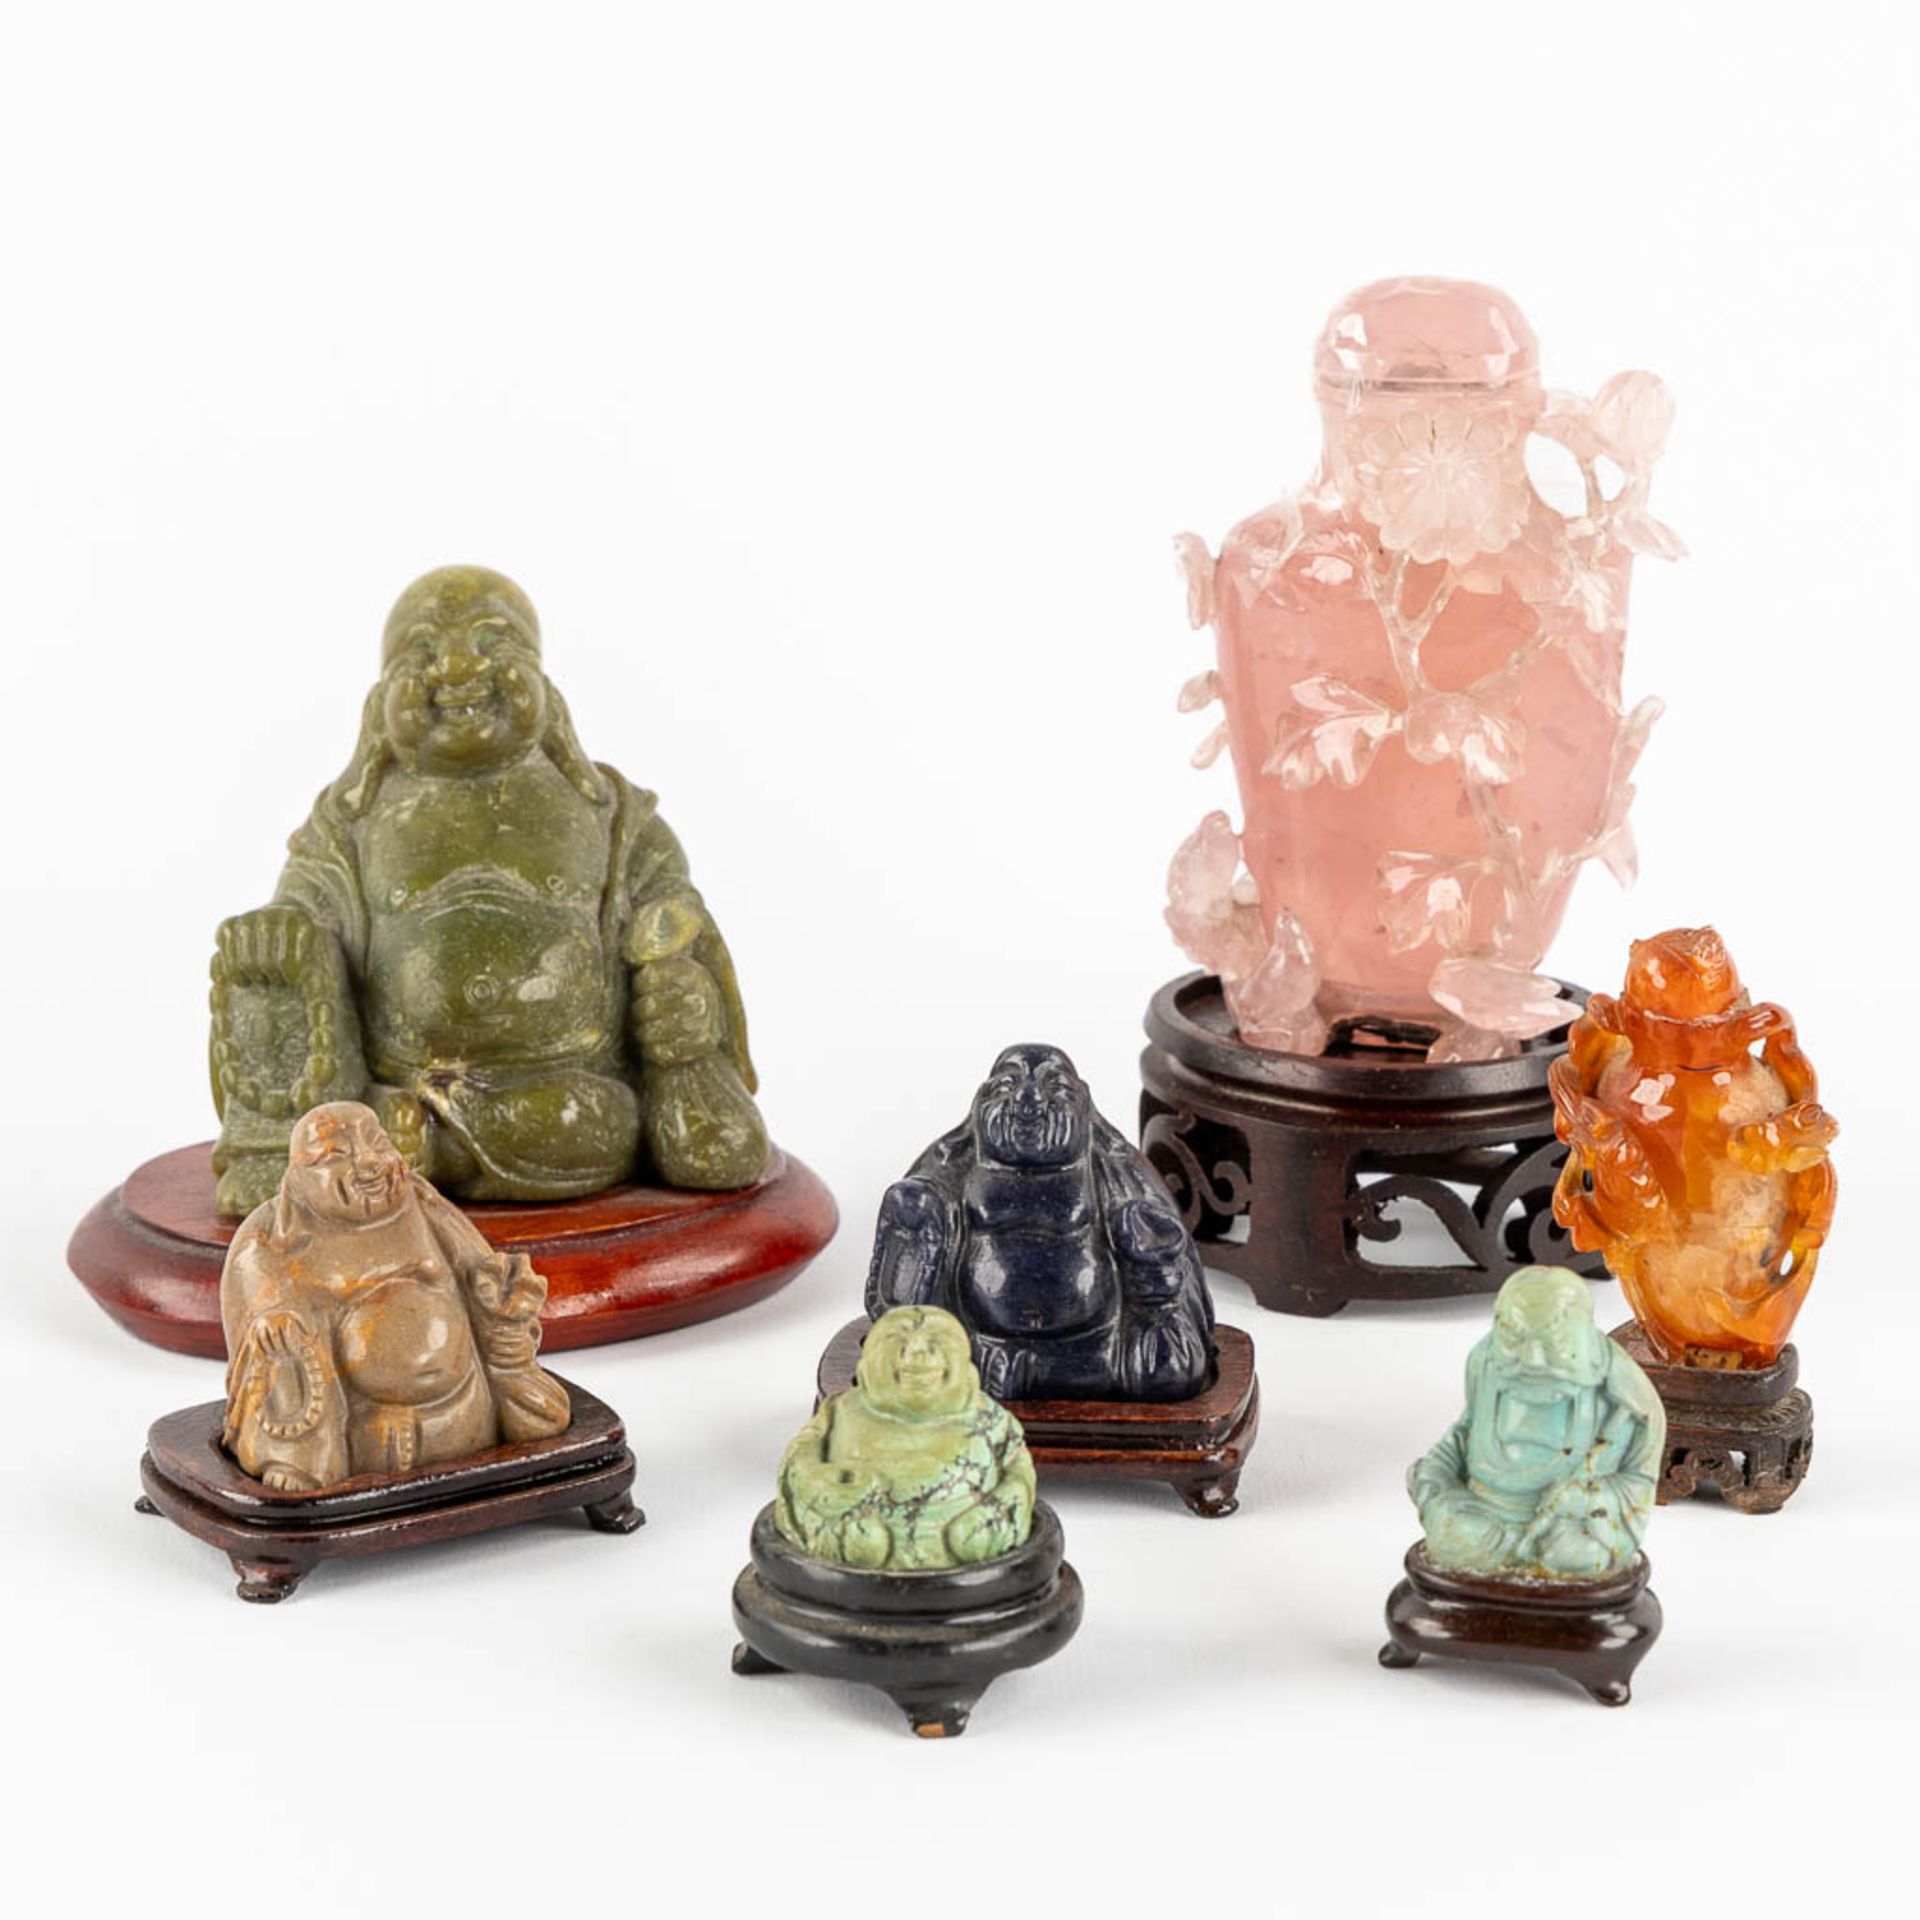 Six Buddha and a snuff bottle, Sculptured hardstones or jade. China. (L:6 x W:8 x H:11,5 cm)